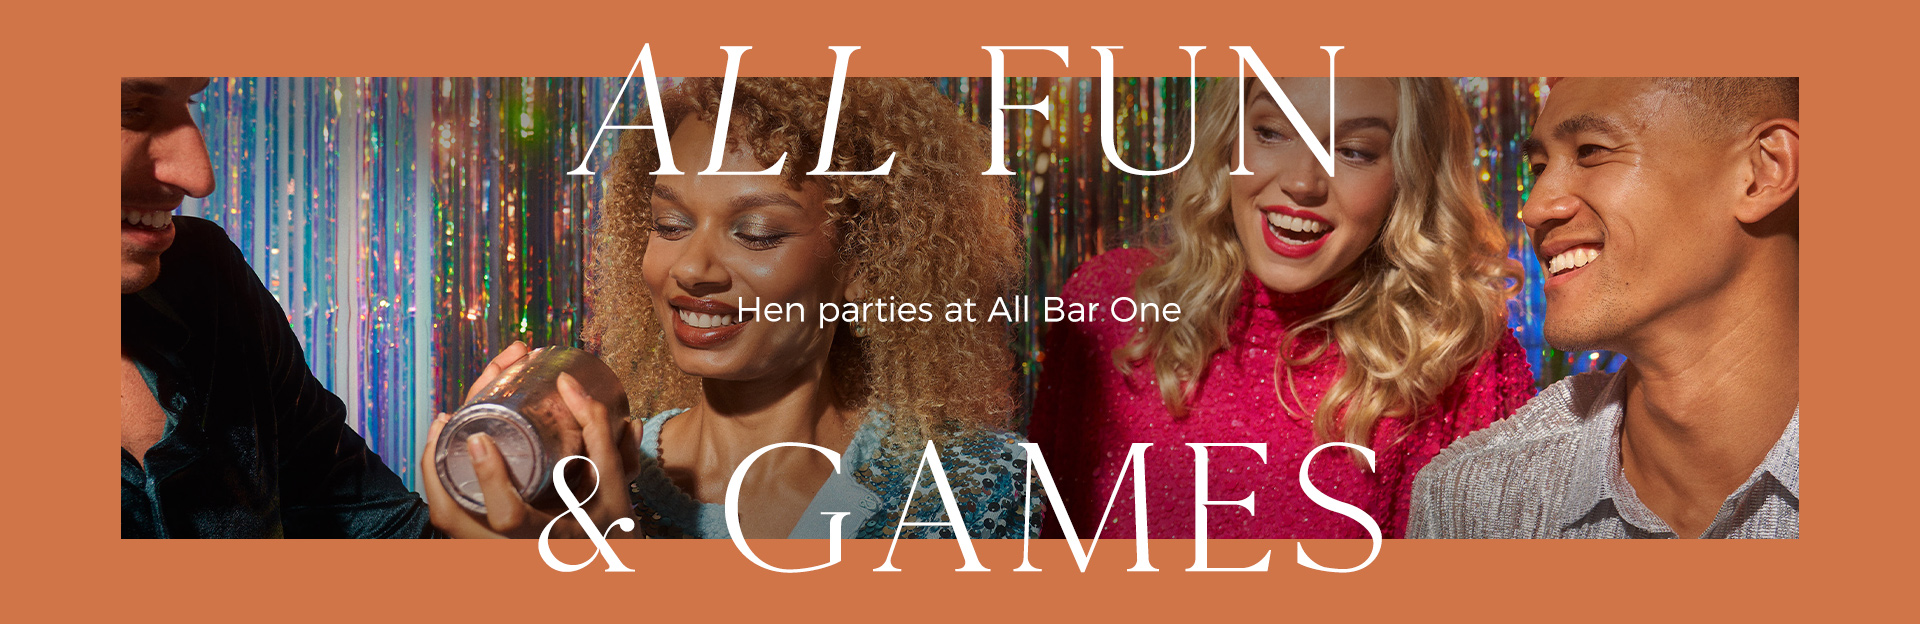 Hen parties at All Bar One Portsmouth